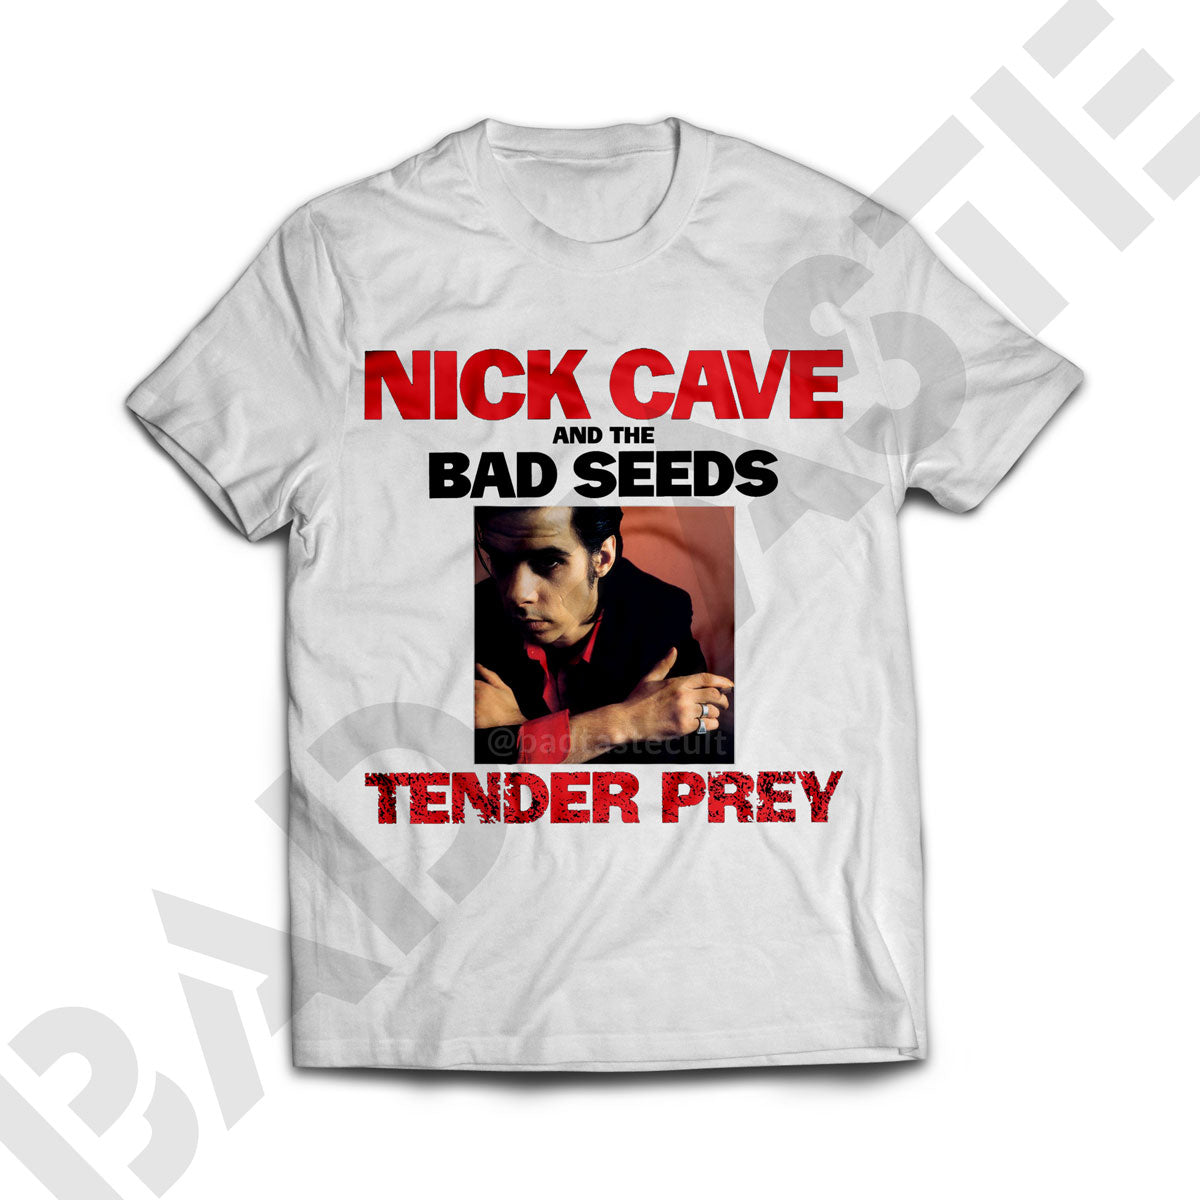 [POLO] Nick Cave and The Bad Seeds 'Tender Prey'